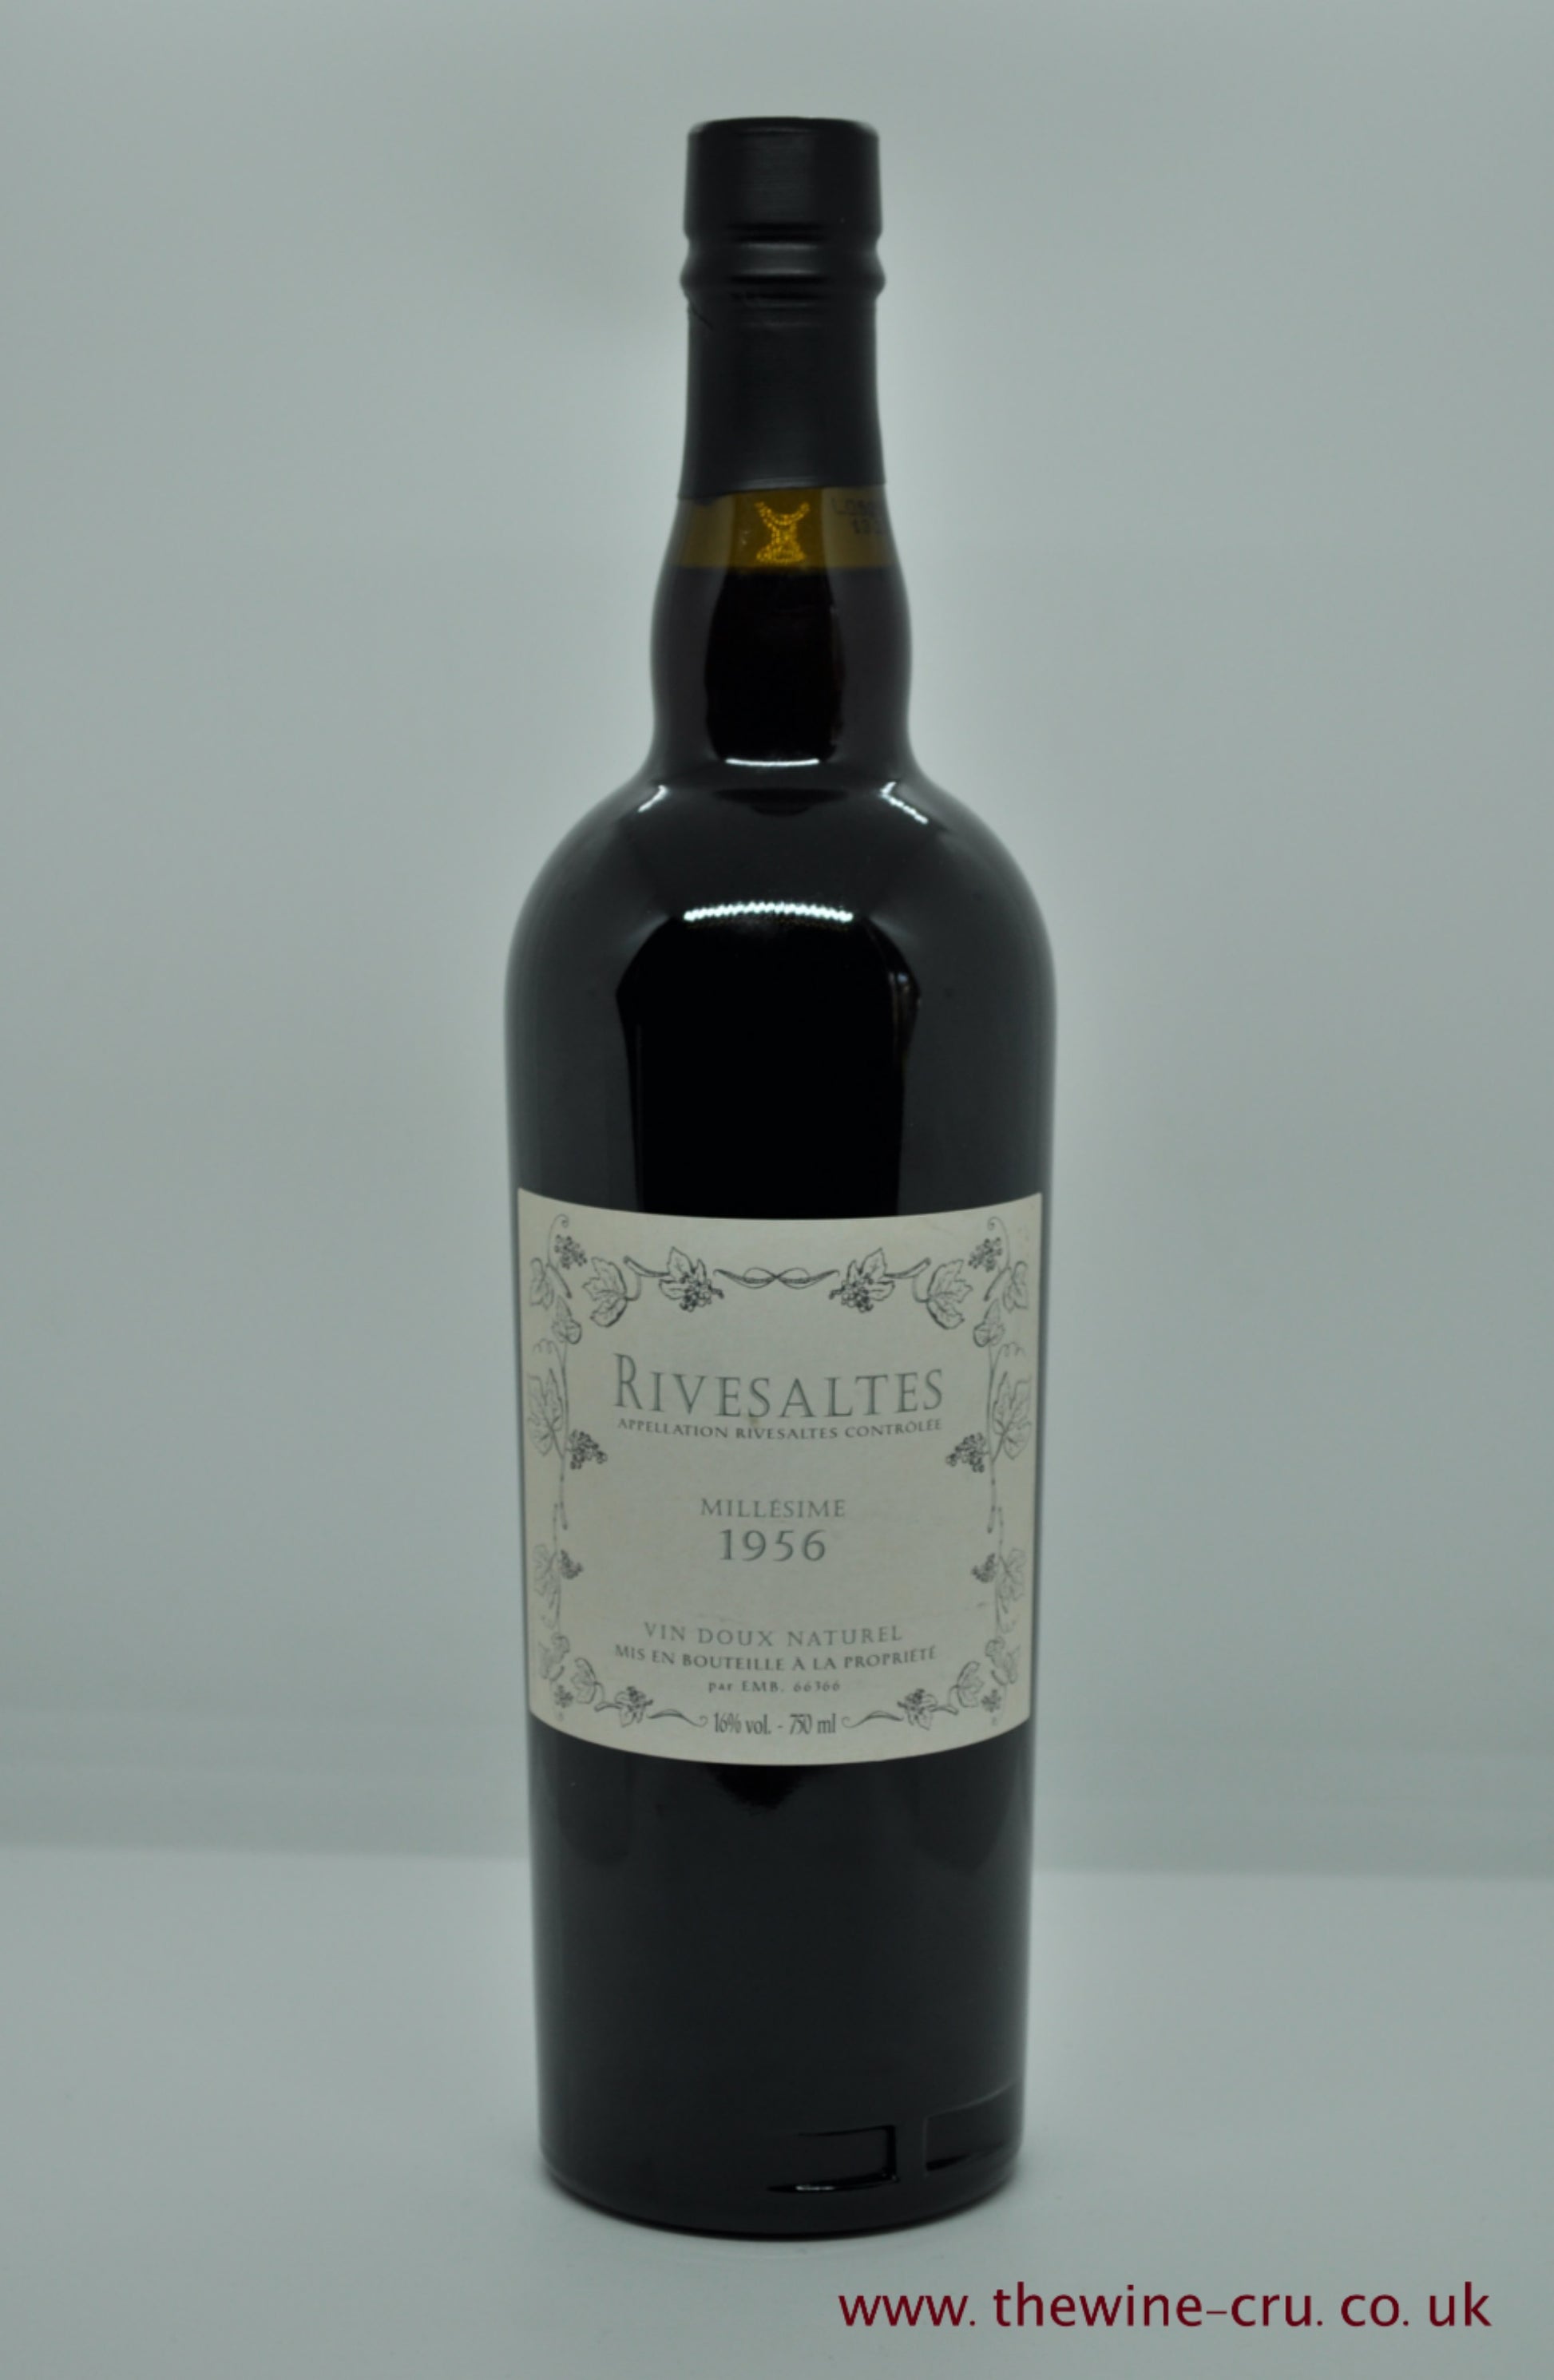 1956 vintage sweet wine. Domaine et Terroirs du Sud Rivesaltes 1956. France. Immediate delivery. Free local delivery. Gift wrapping available.